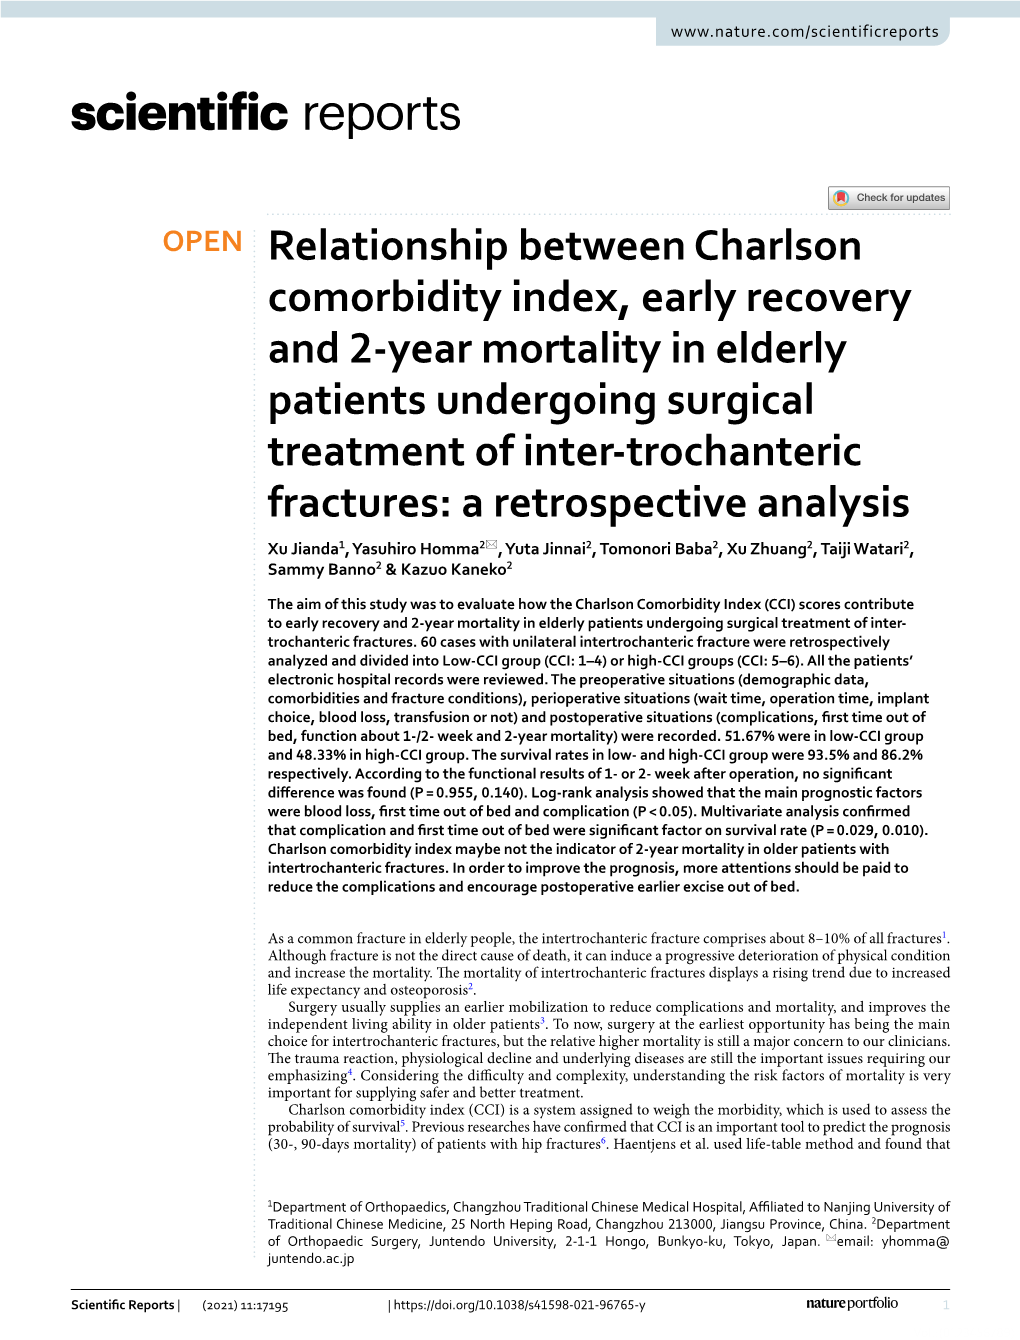 Relationship Between Charlson Comorbidity Index, Early Recovery and 2-Year Mortality in Elderly Patients Undergoing Surgical